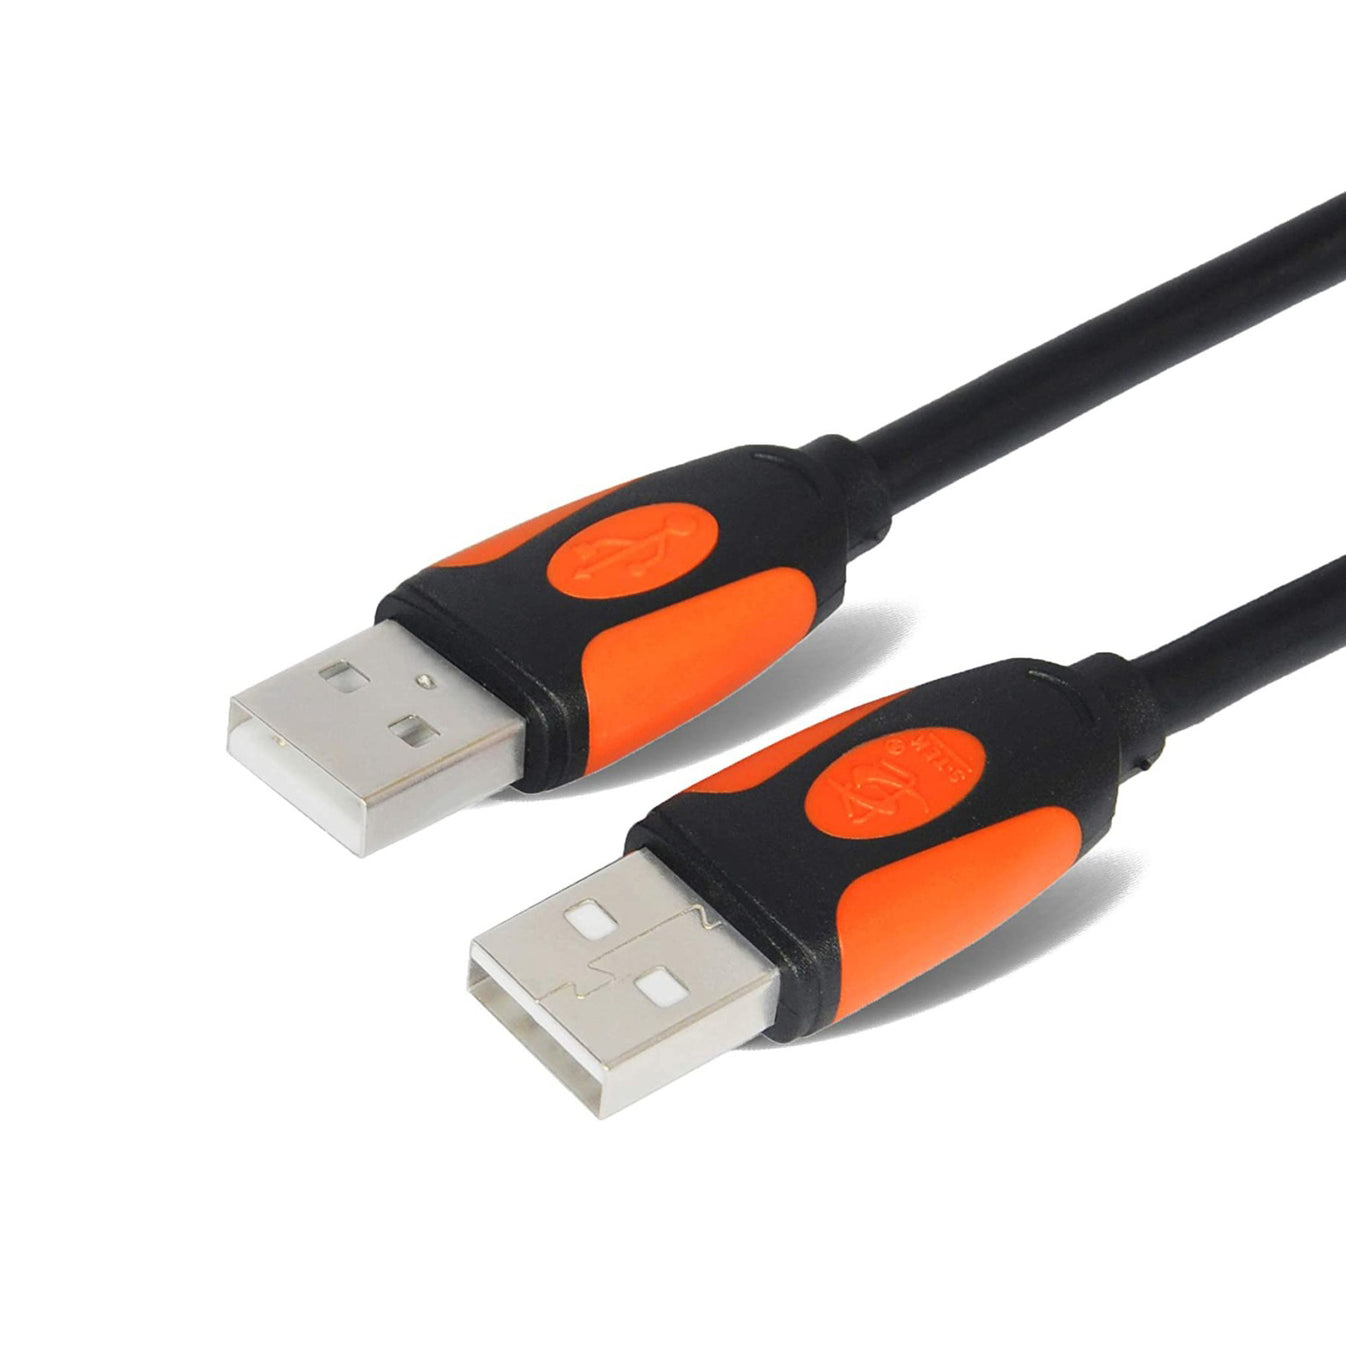 S-TEK USB Male to Male Cable for Data Transfer on External Hard Drive